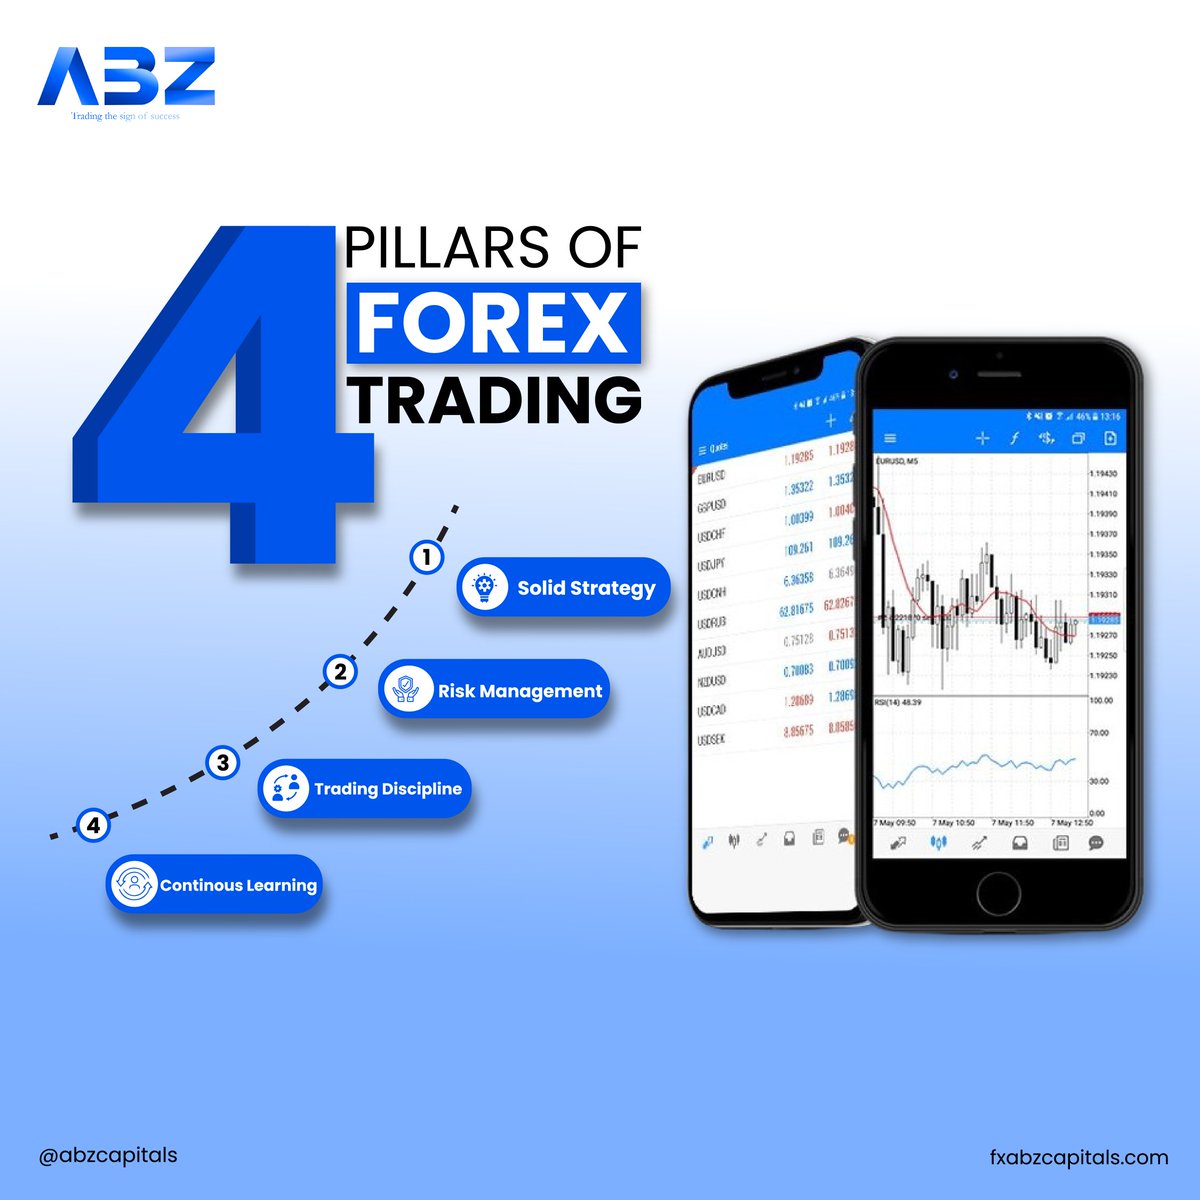 Discover the core elements of successful Forex trading:

1. Solid Strategy
2. Risk Management
3. Trading Discipline
4. Continuous Learning

Ready to take the leap? Let's explore together!

#abzcapitals #forextrading #tradingdiscipline